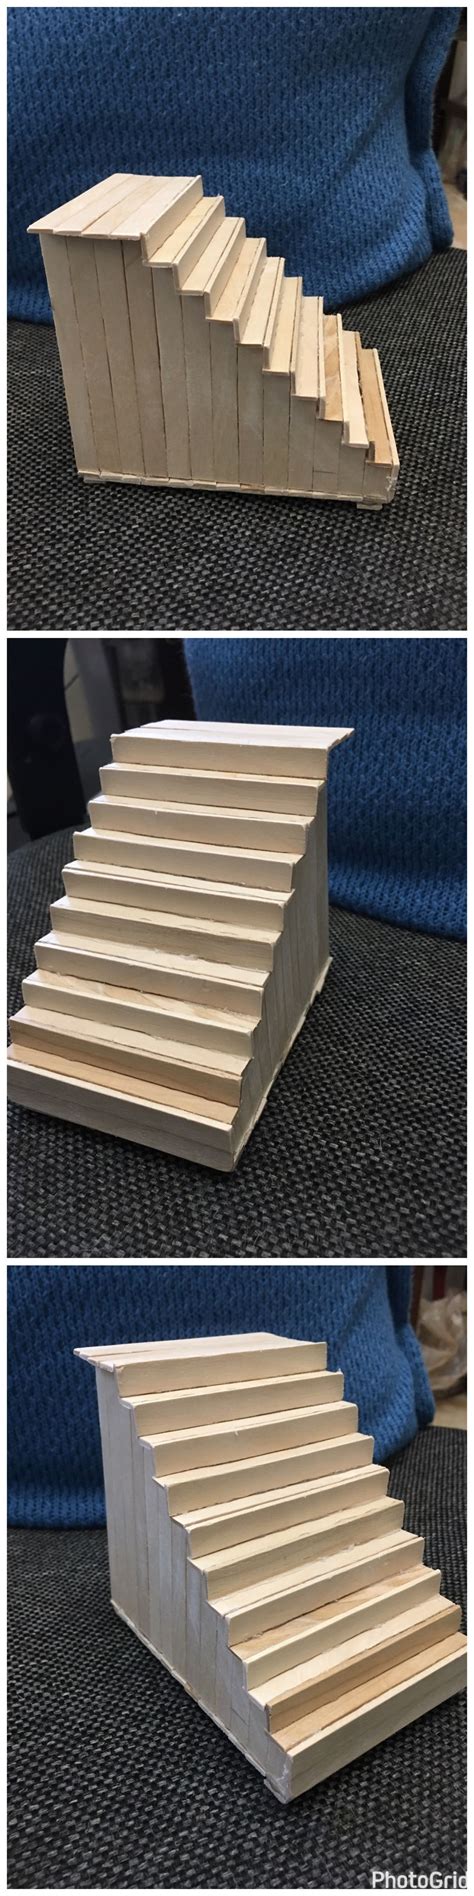 Diy Hamsterpet Staircase To Lead To Another Levelplatform Made Out Of